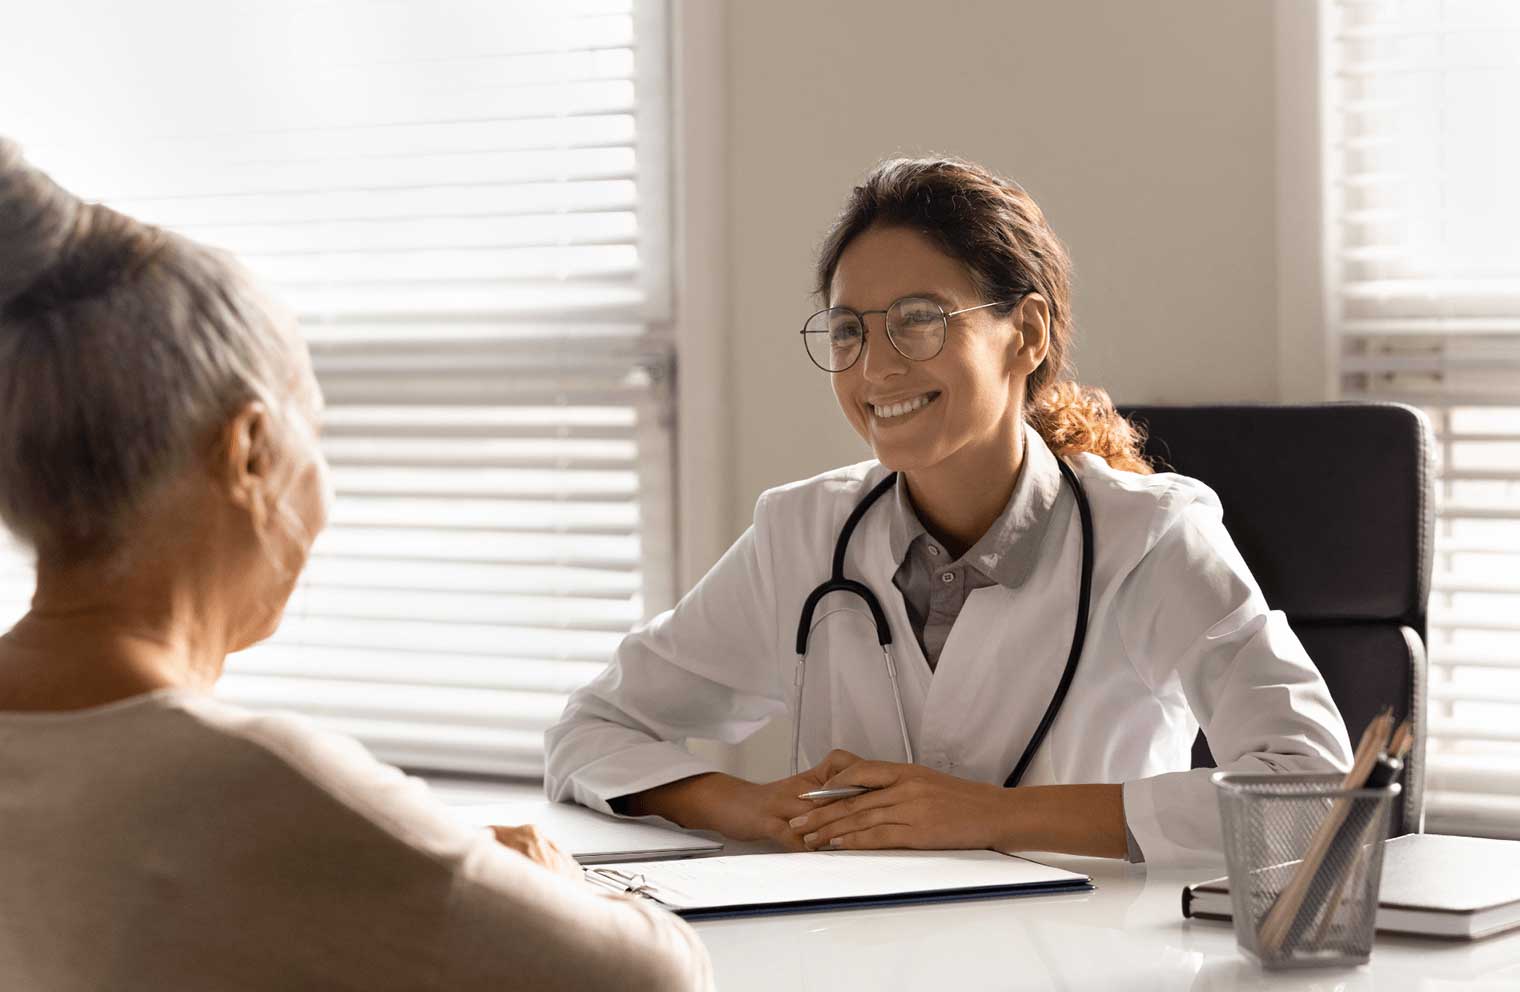 Picture of doctor at a desk across from an elderly woman smiling.